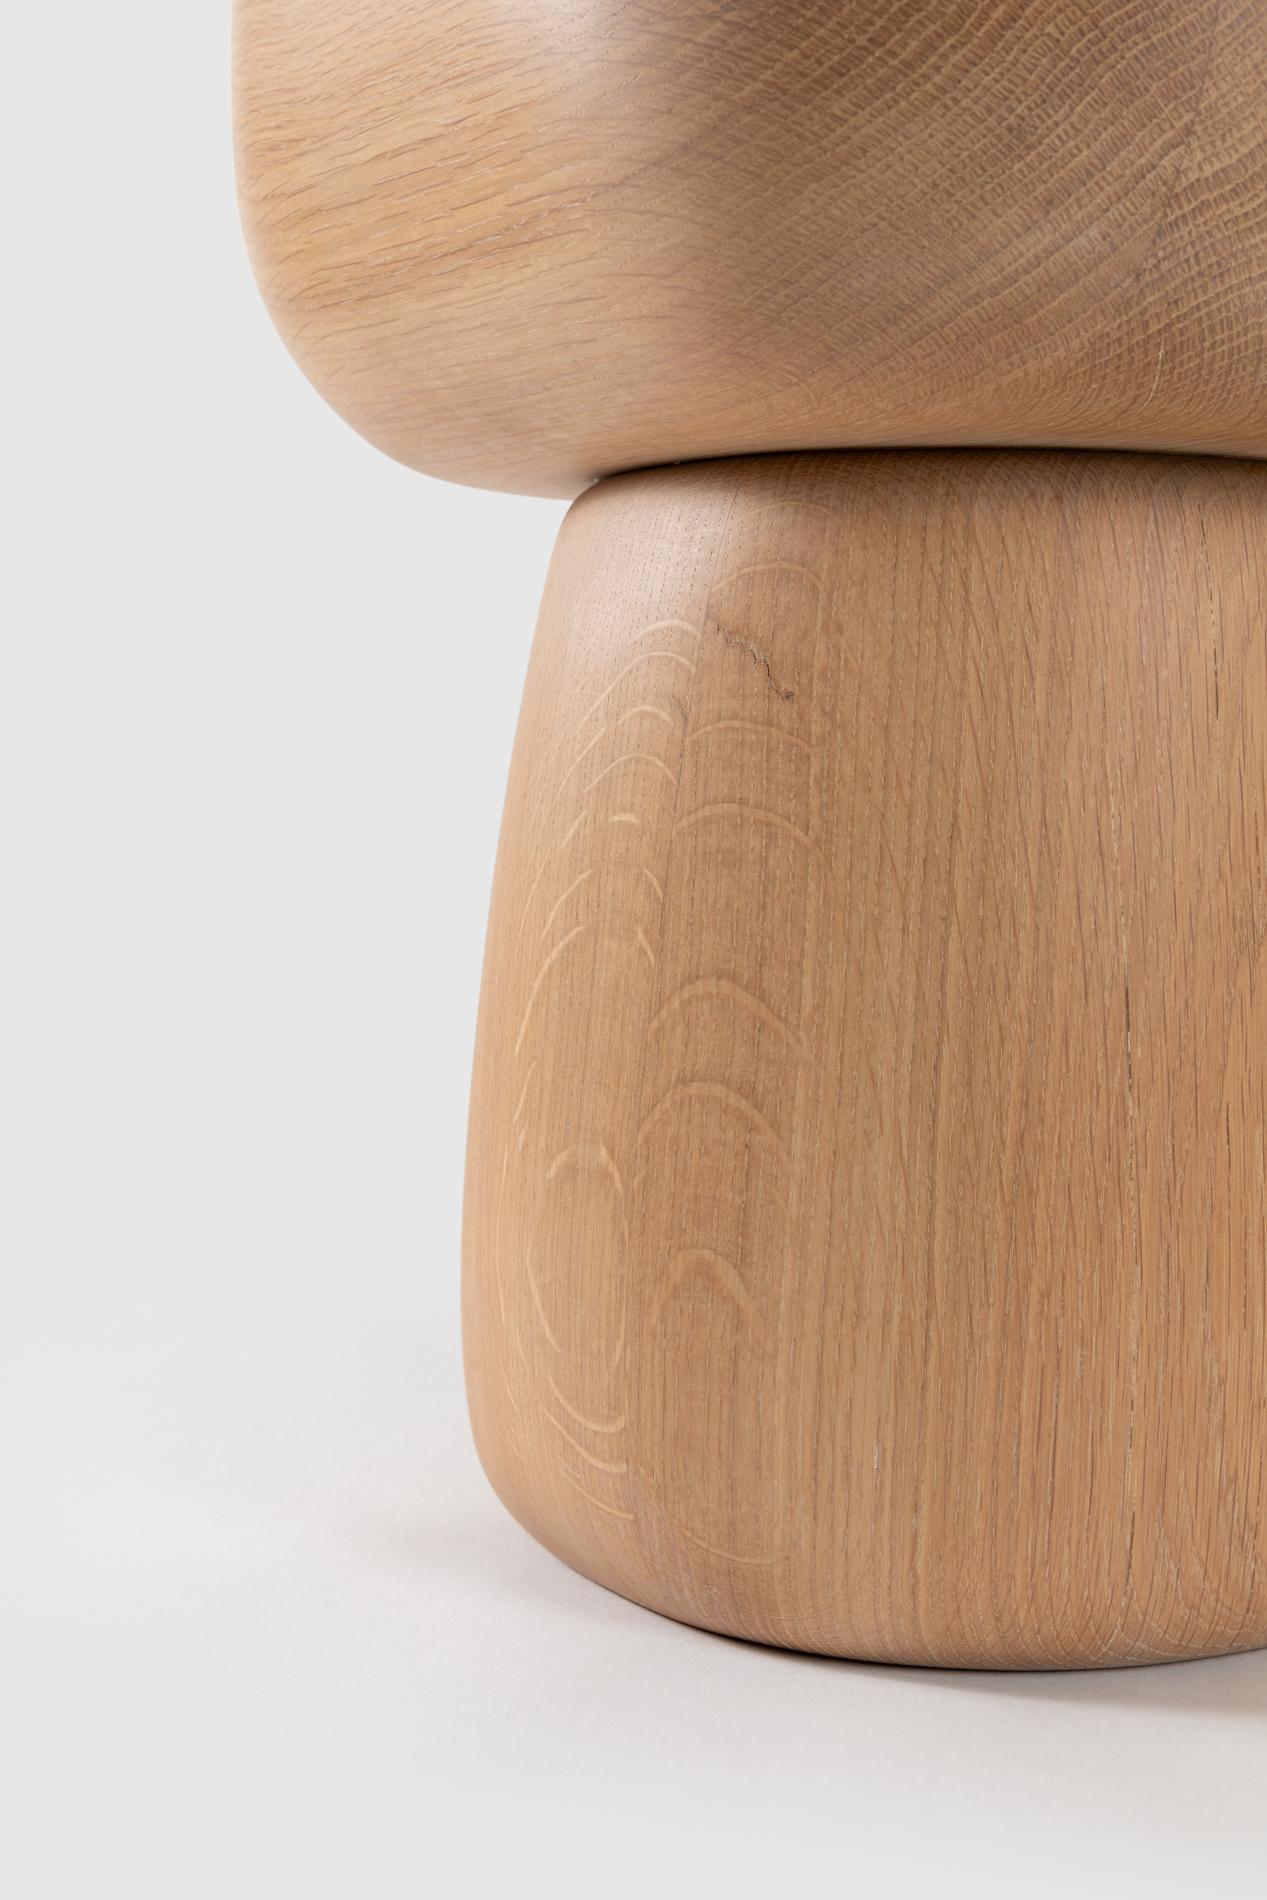 Hughes Stool by Moure Studio 3